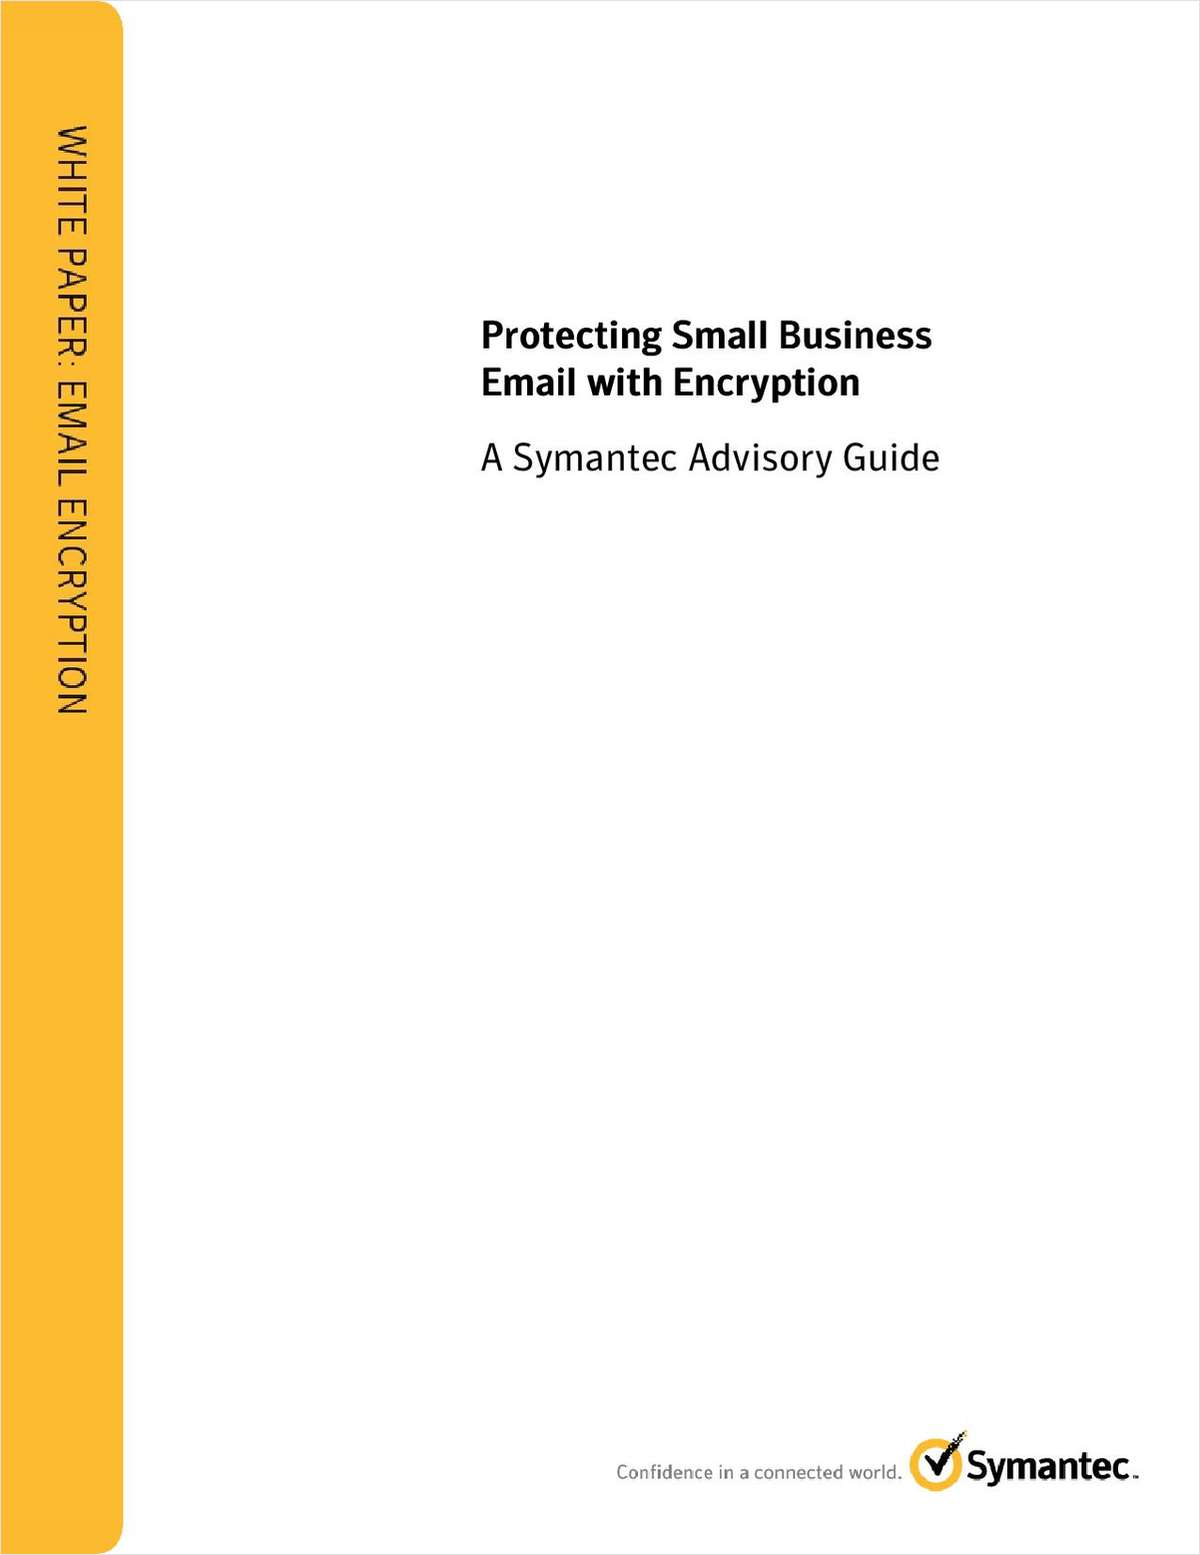 Protecting Small Business Email with Encryption